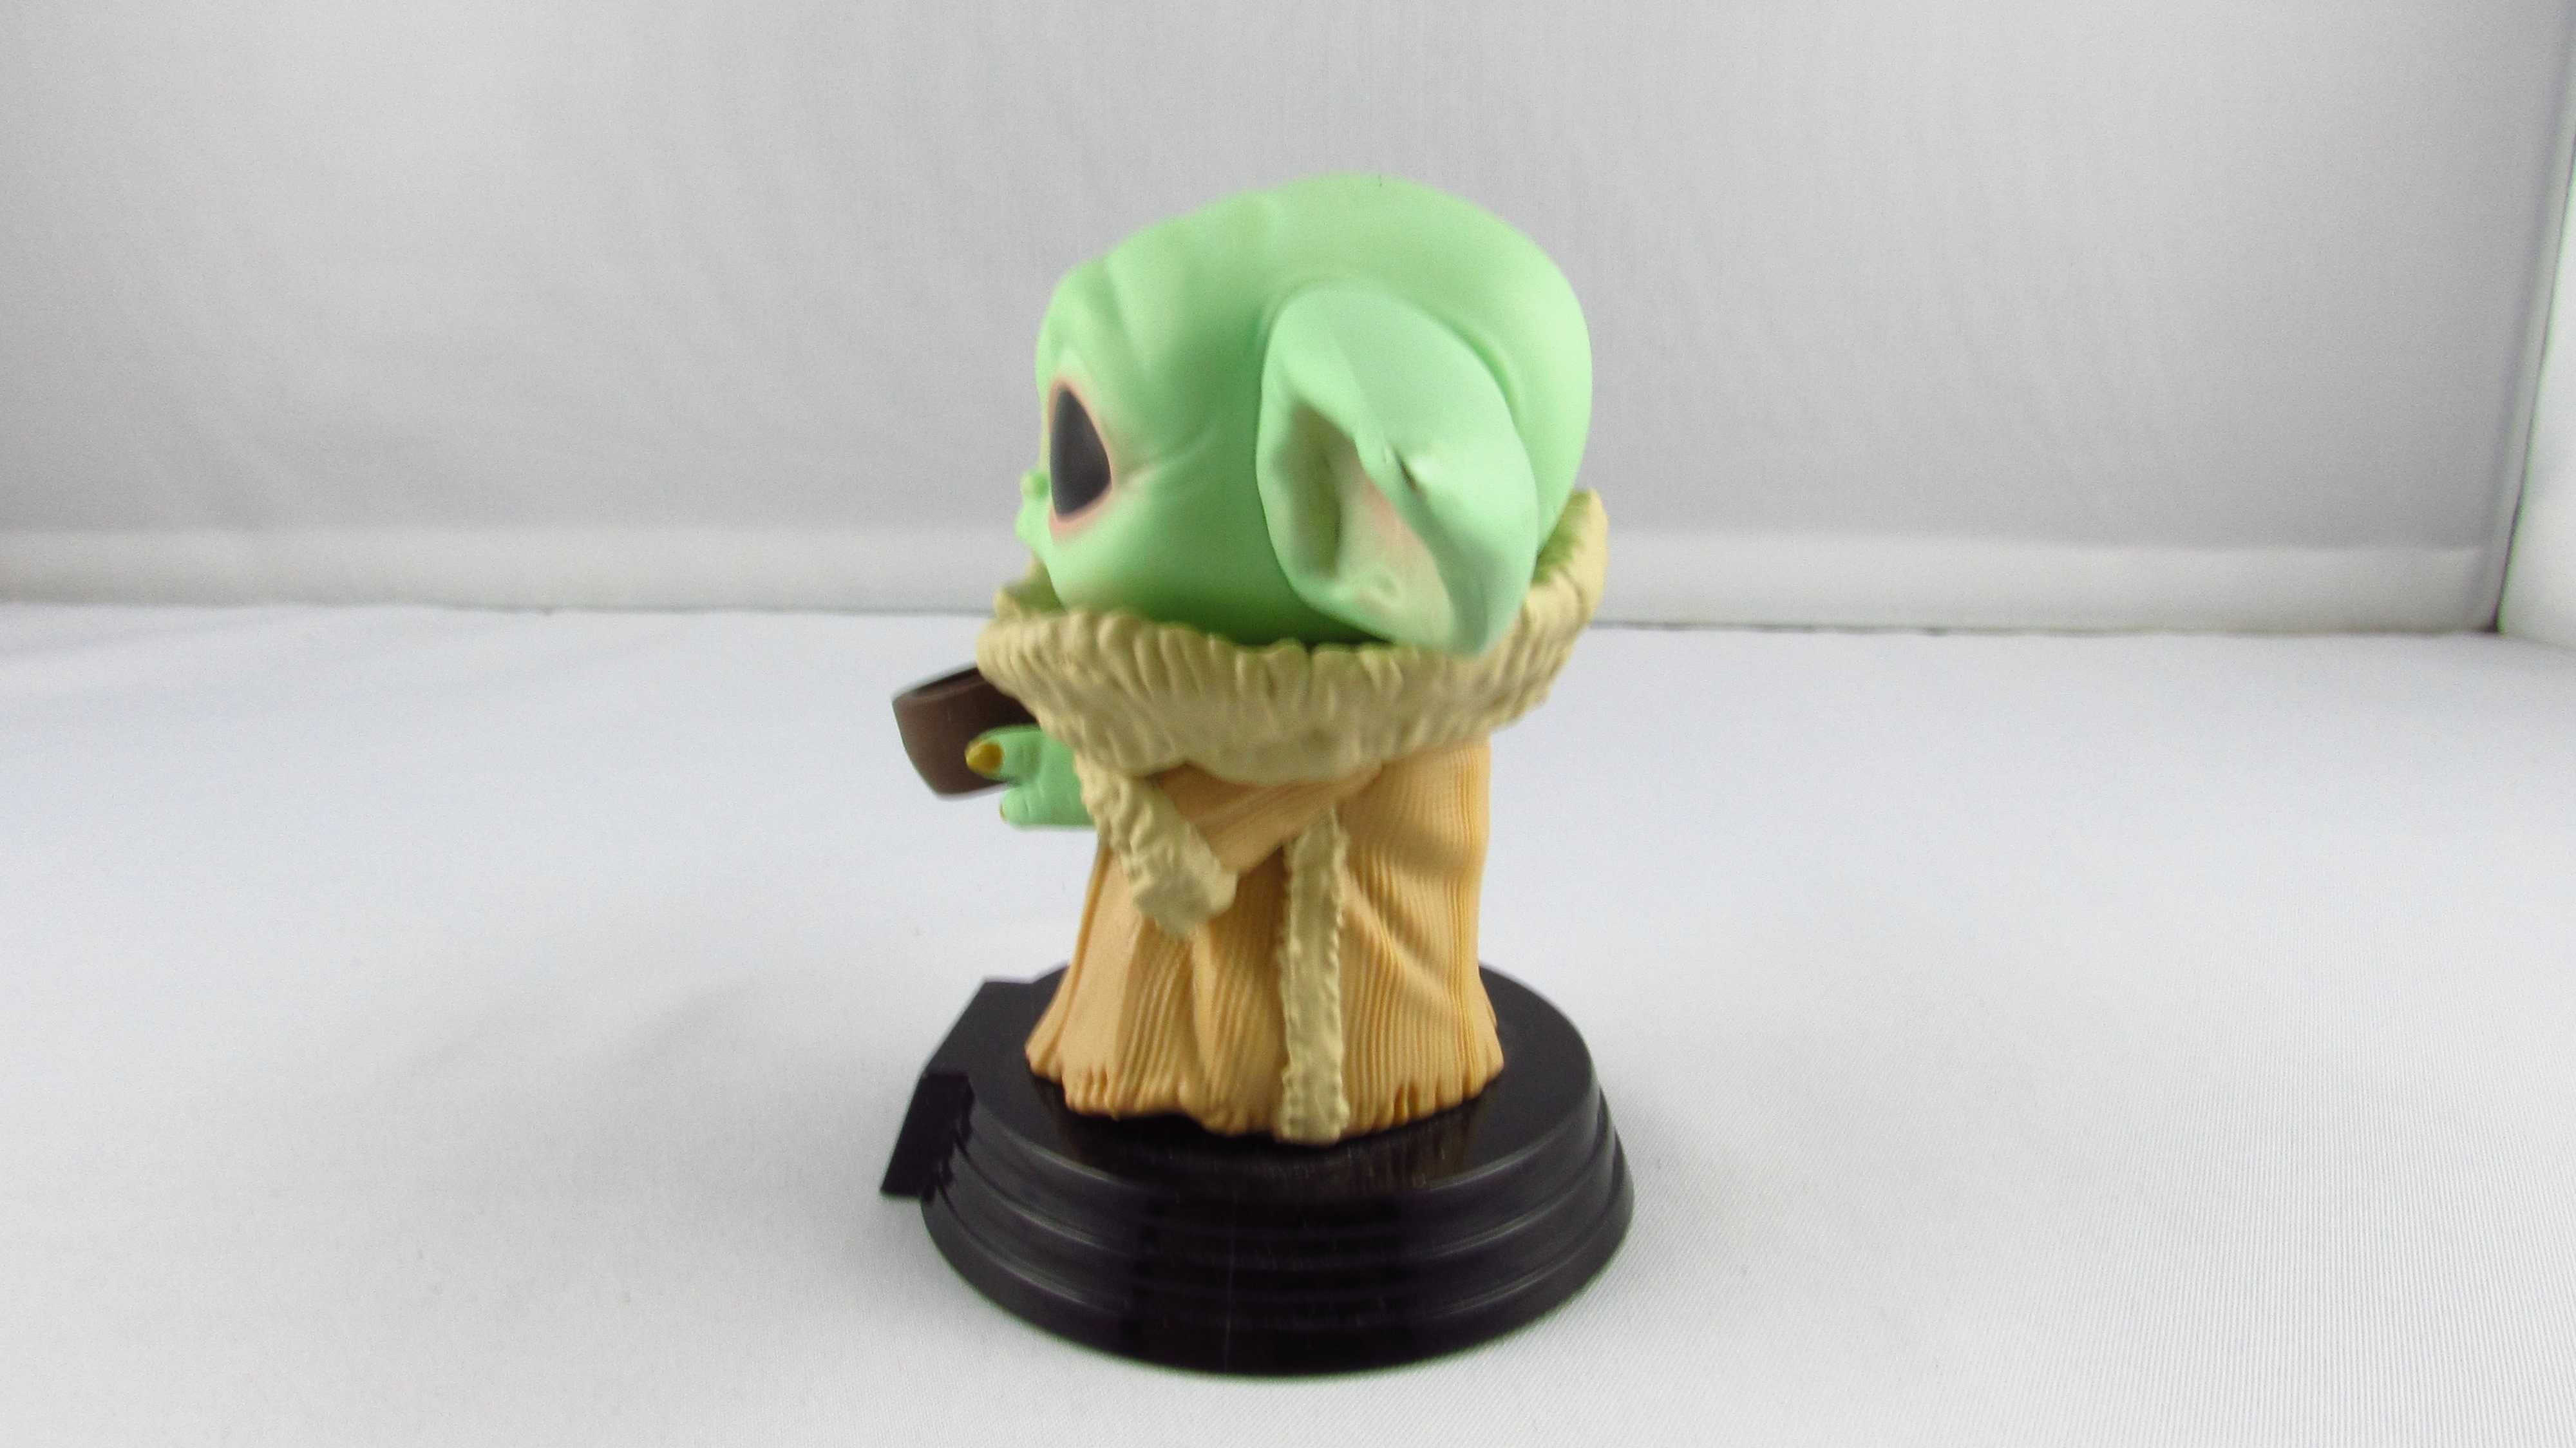 FUNKO POP - Star Wars Baby Yoda The Mandalorian The Child with Cup 378